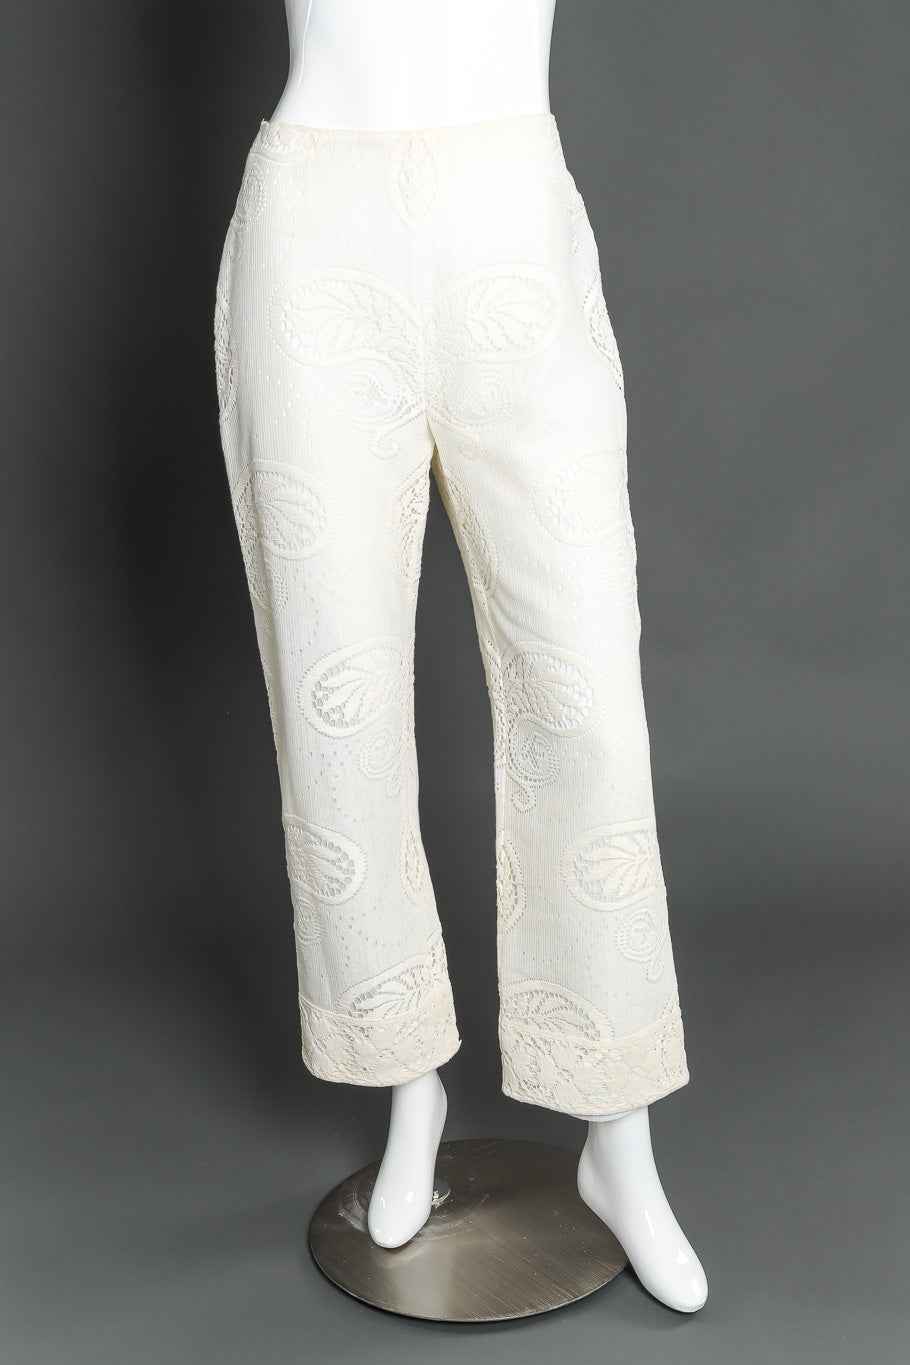 Rebecca for I. Magnin & Co. embroidered tunic and pant set on mannequin @recessla